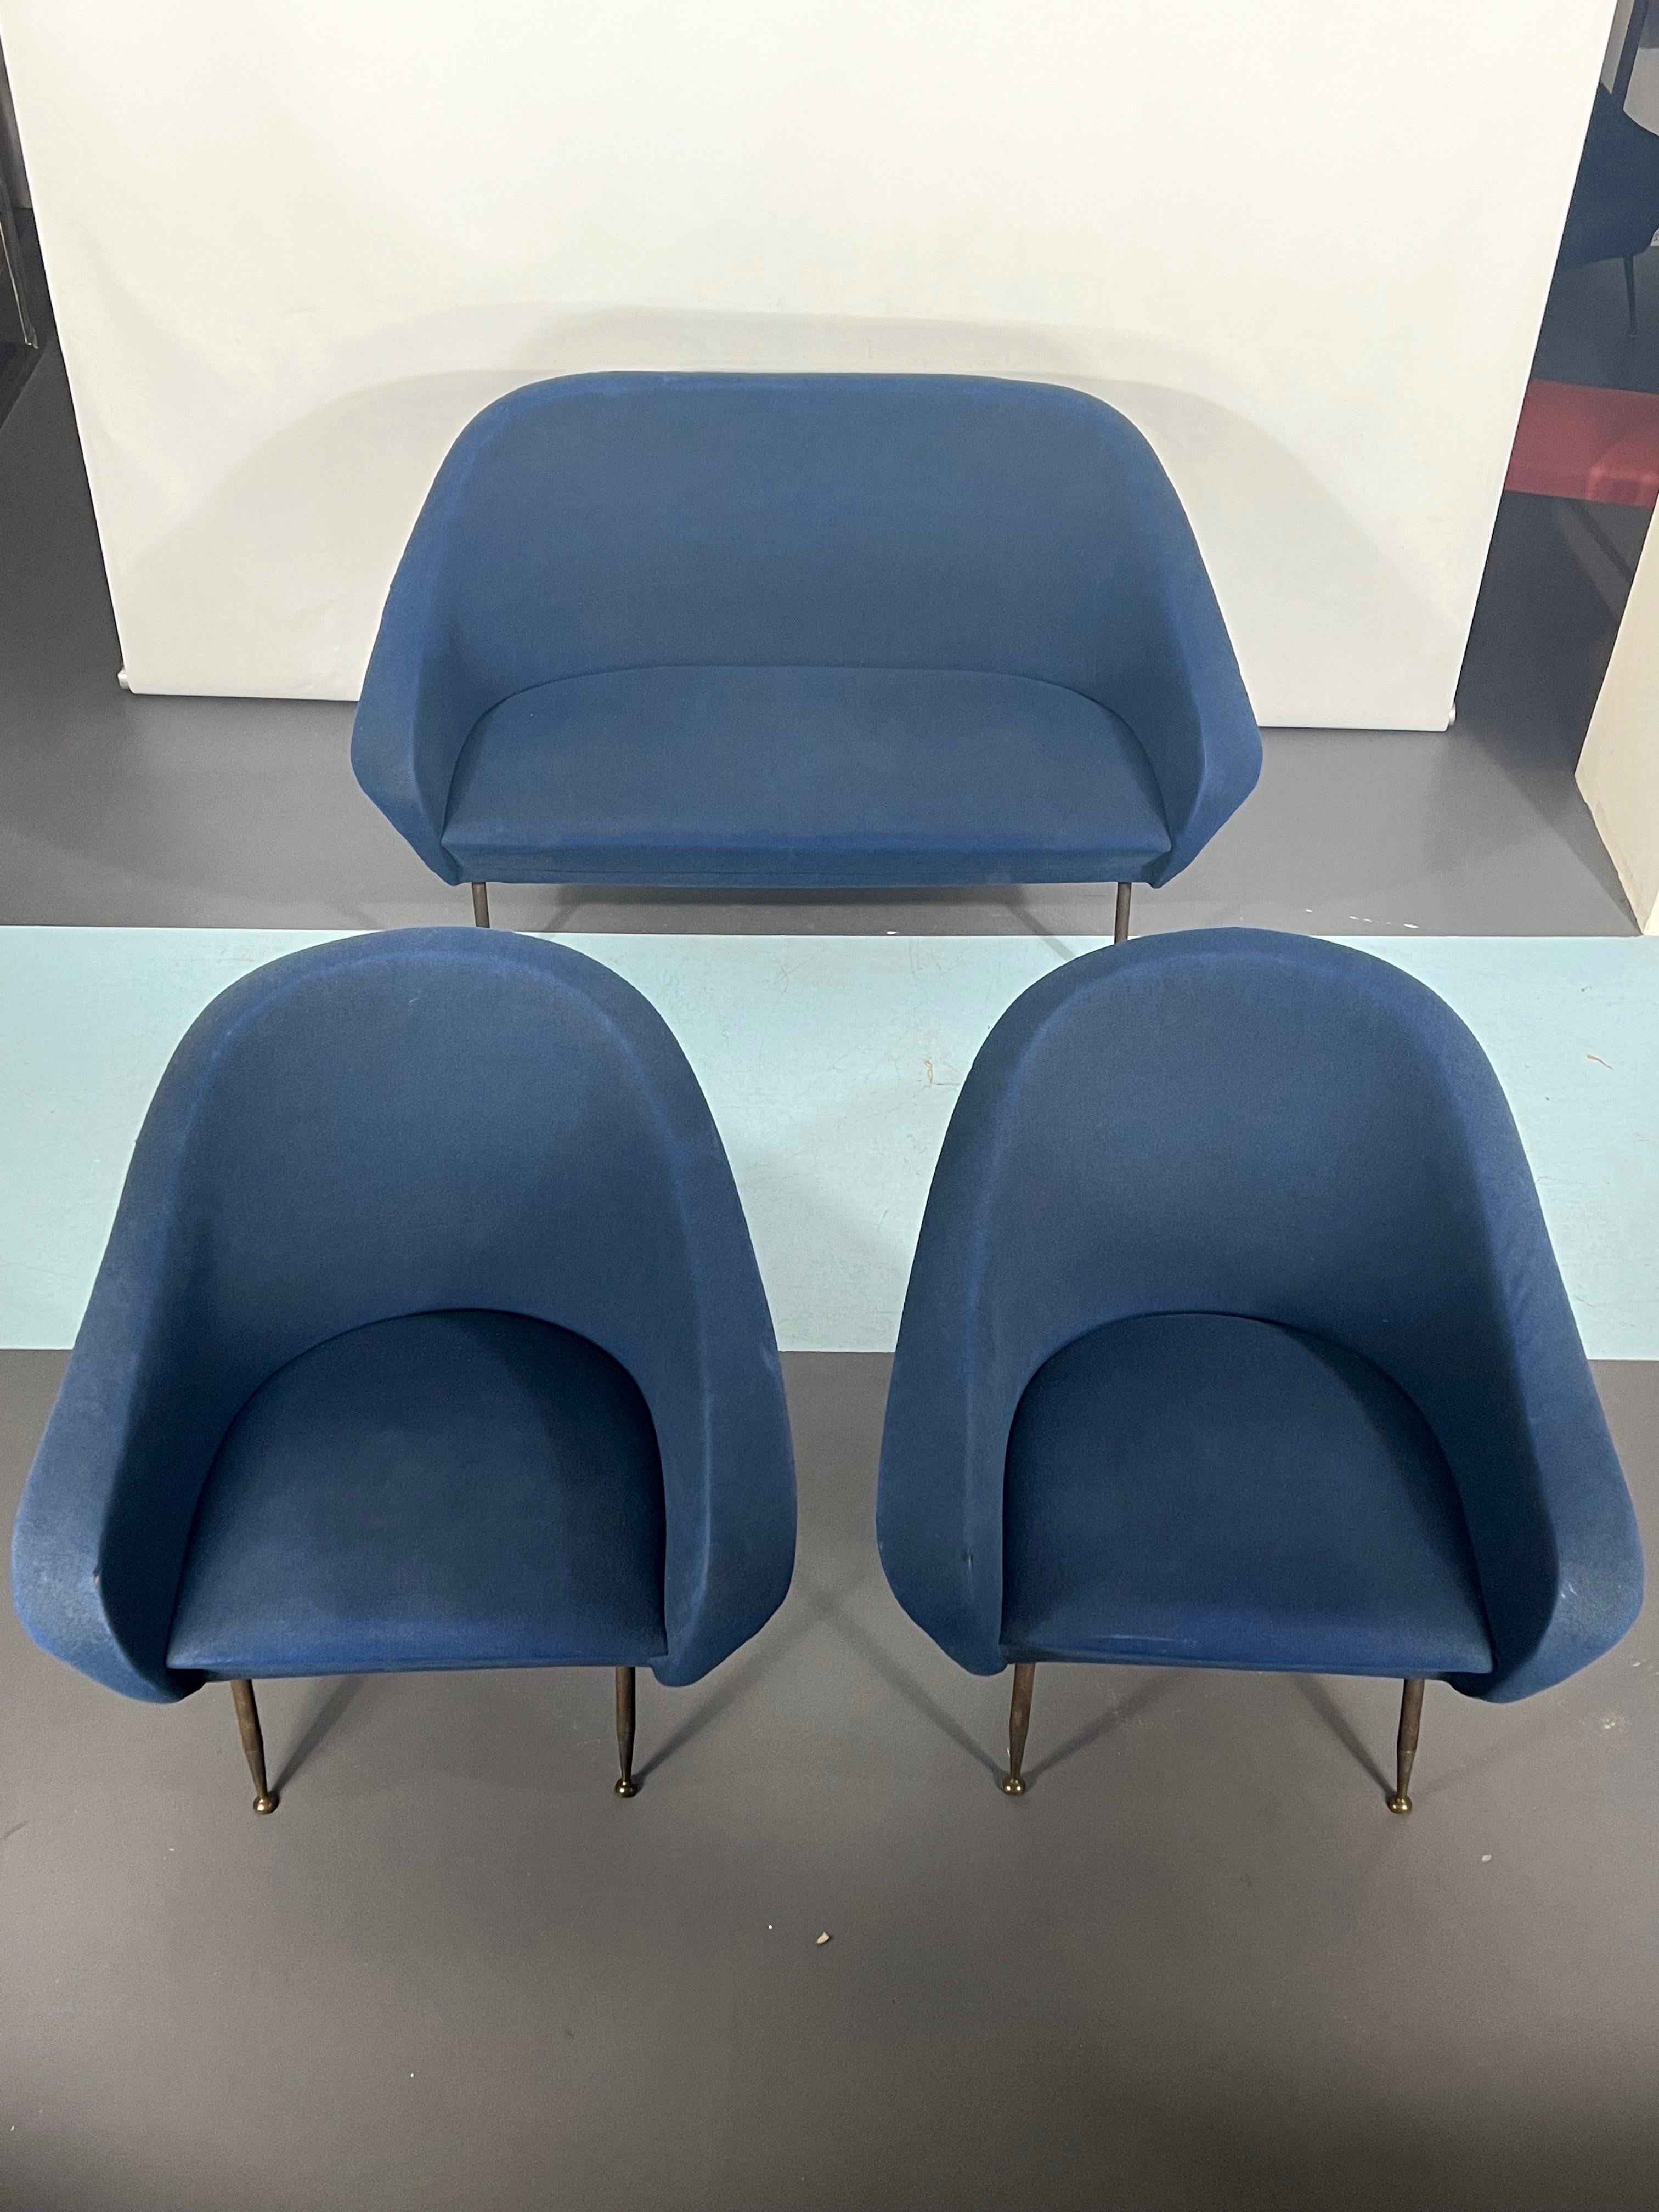 Original vintage condition with some defects on the fabric for this set of a sofa and two armchairs designed by Gastone Rinaldi and produces by his factory Rima during the 50s.